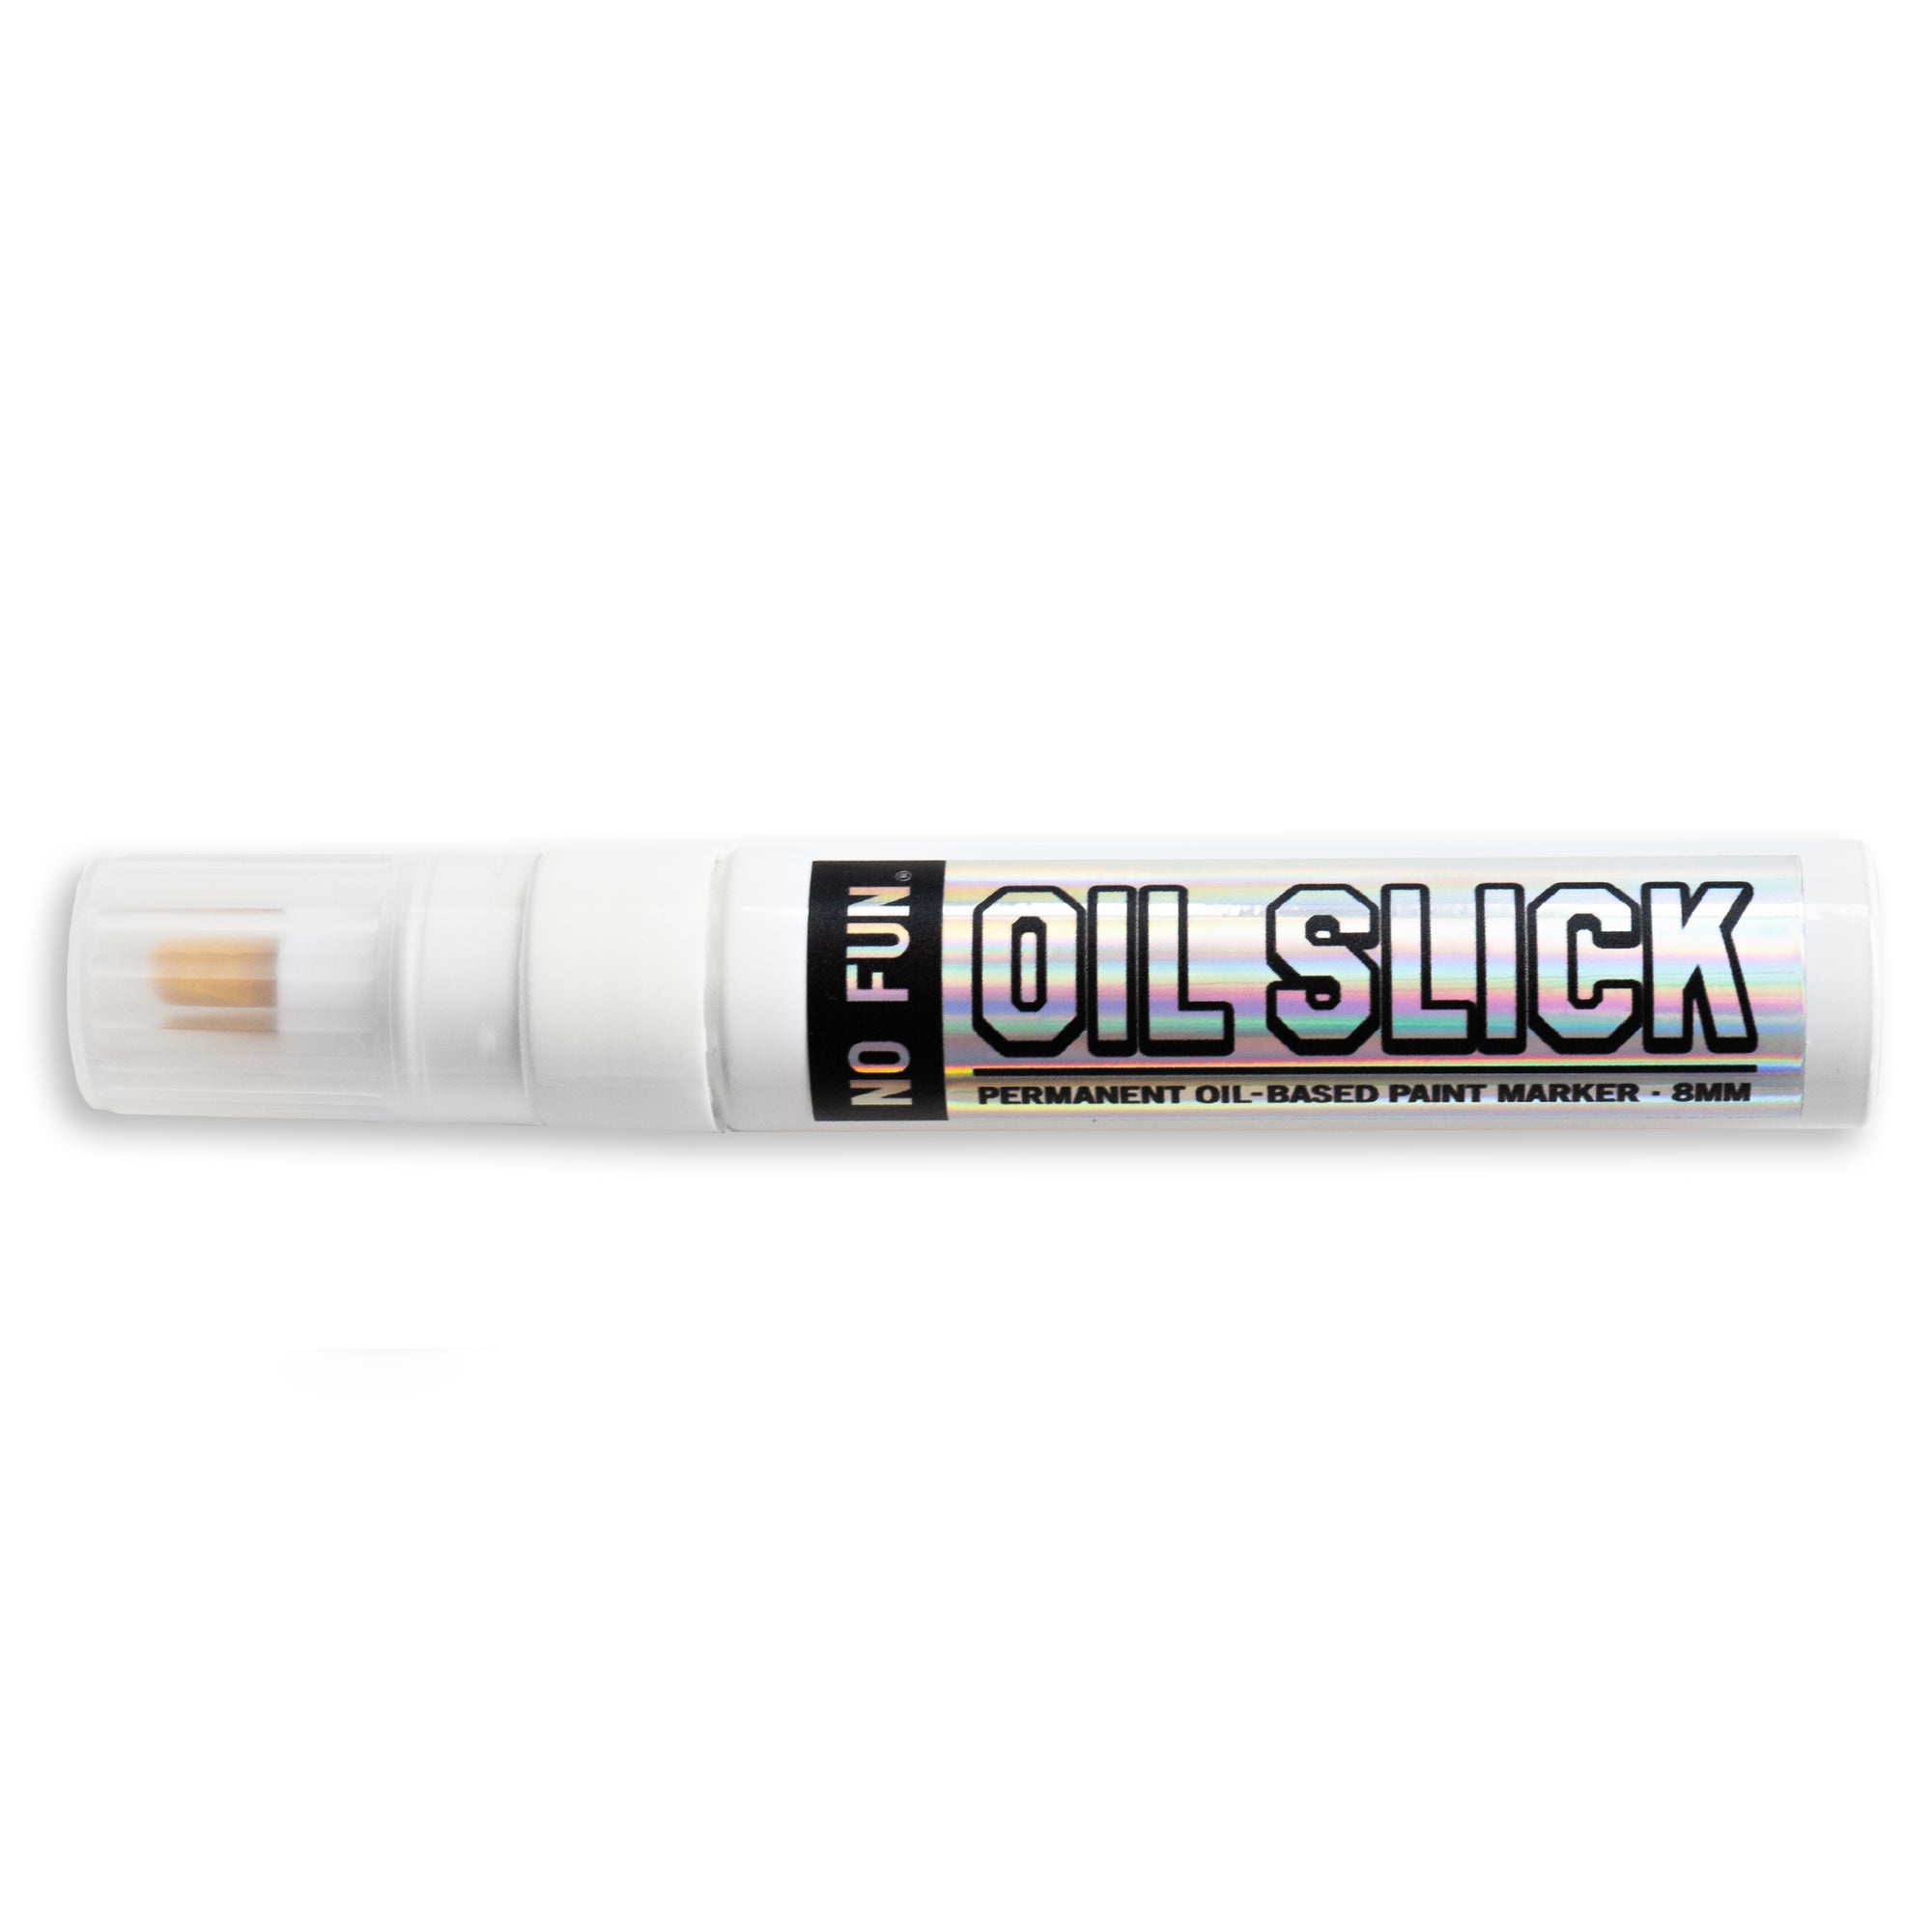 "Oil Slick™" Paint Marker by No Fun in silver. Body of the marker is white, with white tip and felt tip nib. There is a holographic sticker on the barrel of the marker that reads "No Fun®" Oil Slick, Permanent Oil-Based Paint Marker - 8mm".